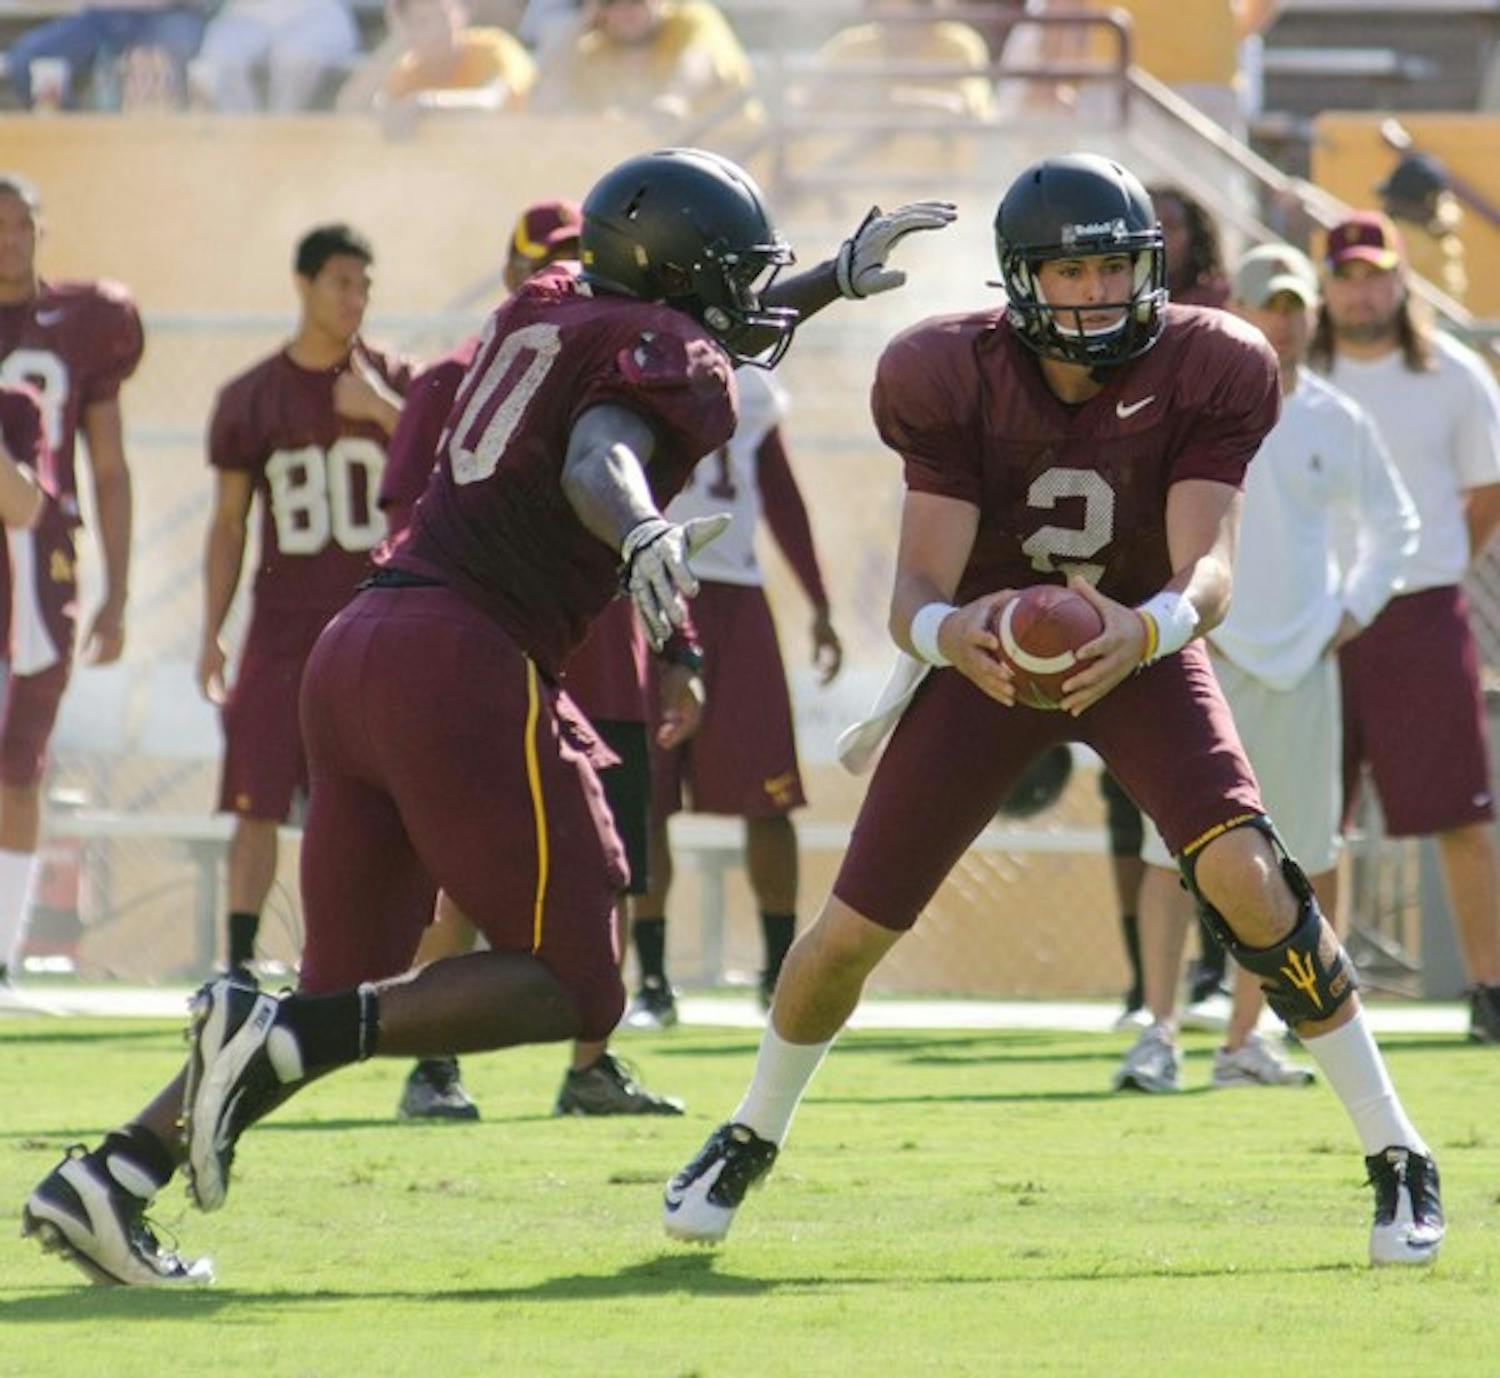 POSITION BATTLE: Freshman backup quarterback Mike Bercovici hands off the ball to redshirt freshman running back Marcus Washington during Saturday’s scrimmage. Head coach Dennis Erickson has yet to decide whether Bercovici or redshirt freshman Taylor Kelly will be the no. 2 quarterback. (Photo by Aaron Lavinsky)